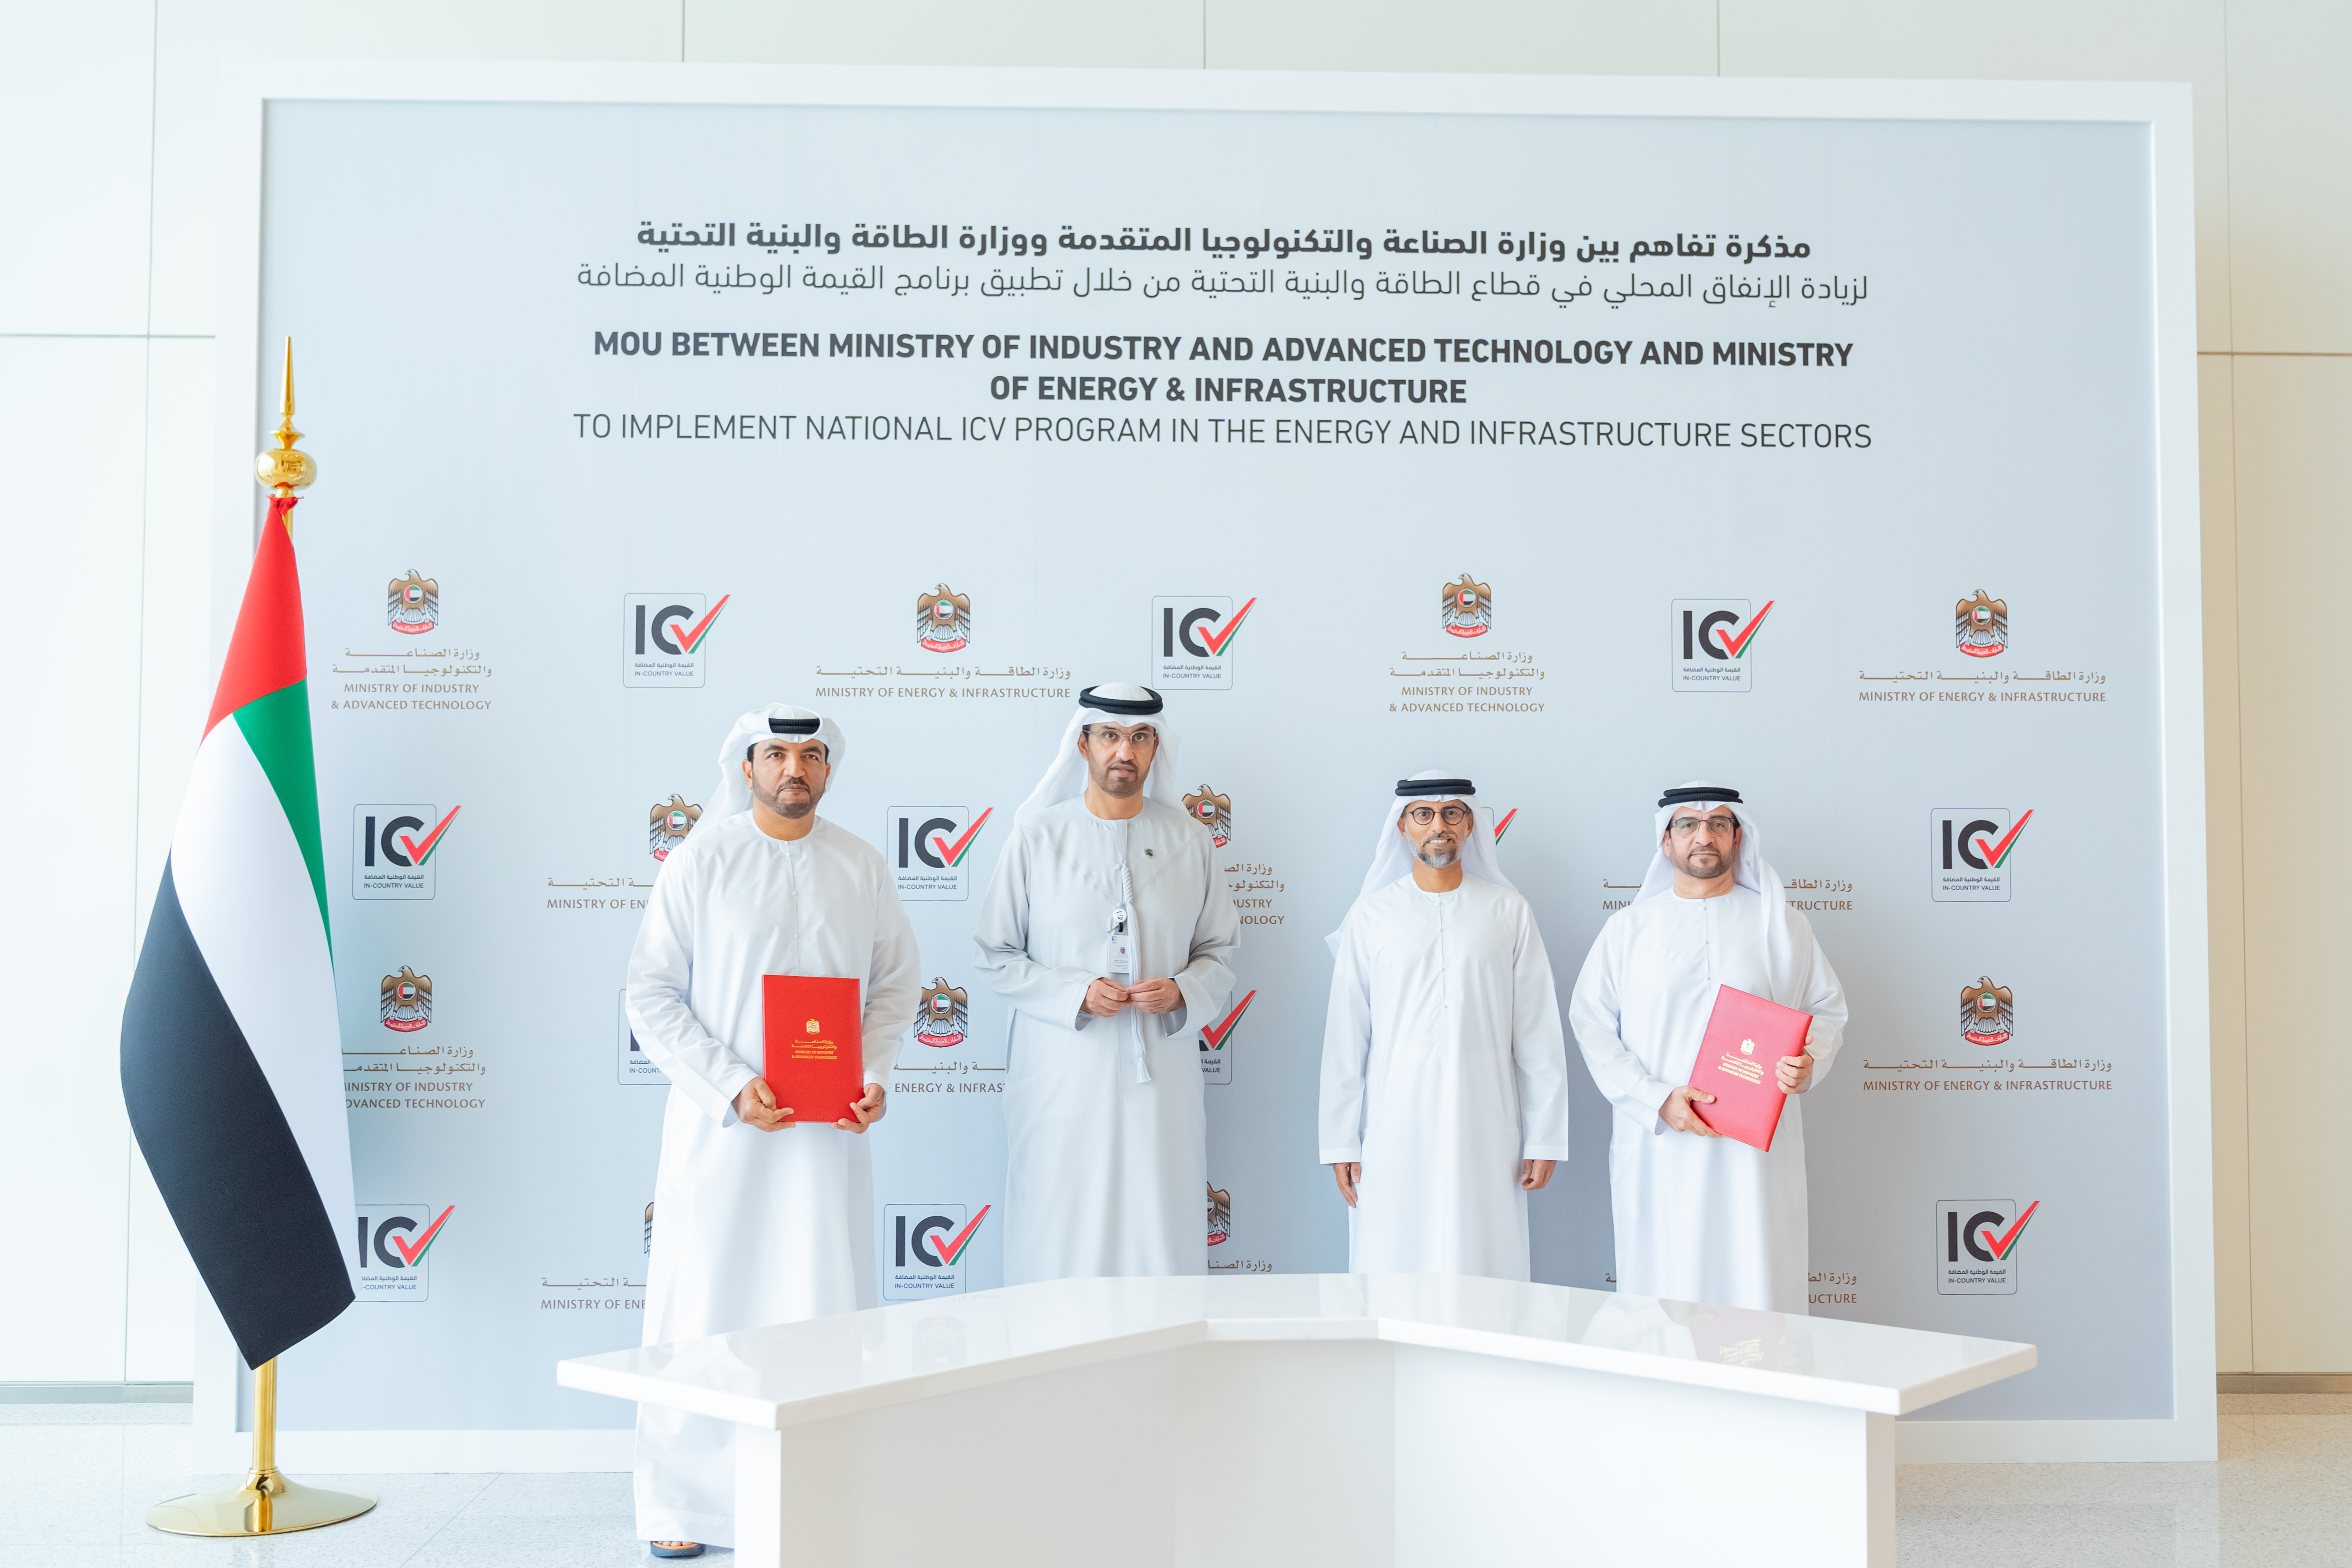 The Ministry of Energy and Infrastructure joins the National ICV Program